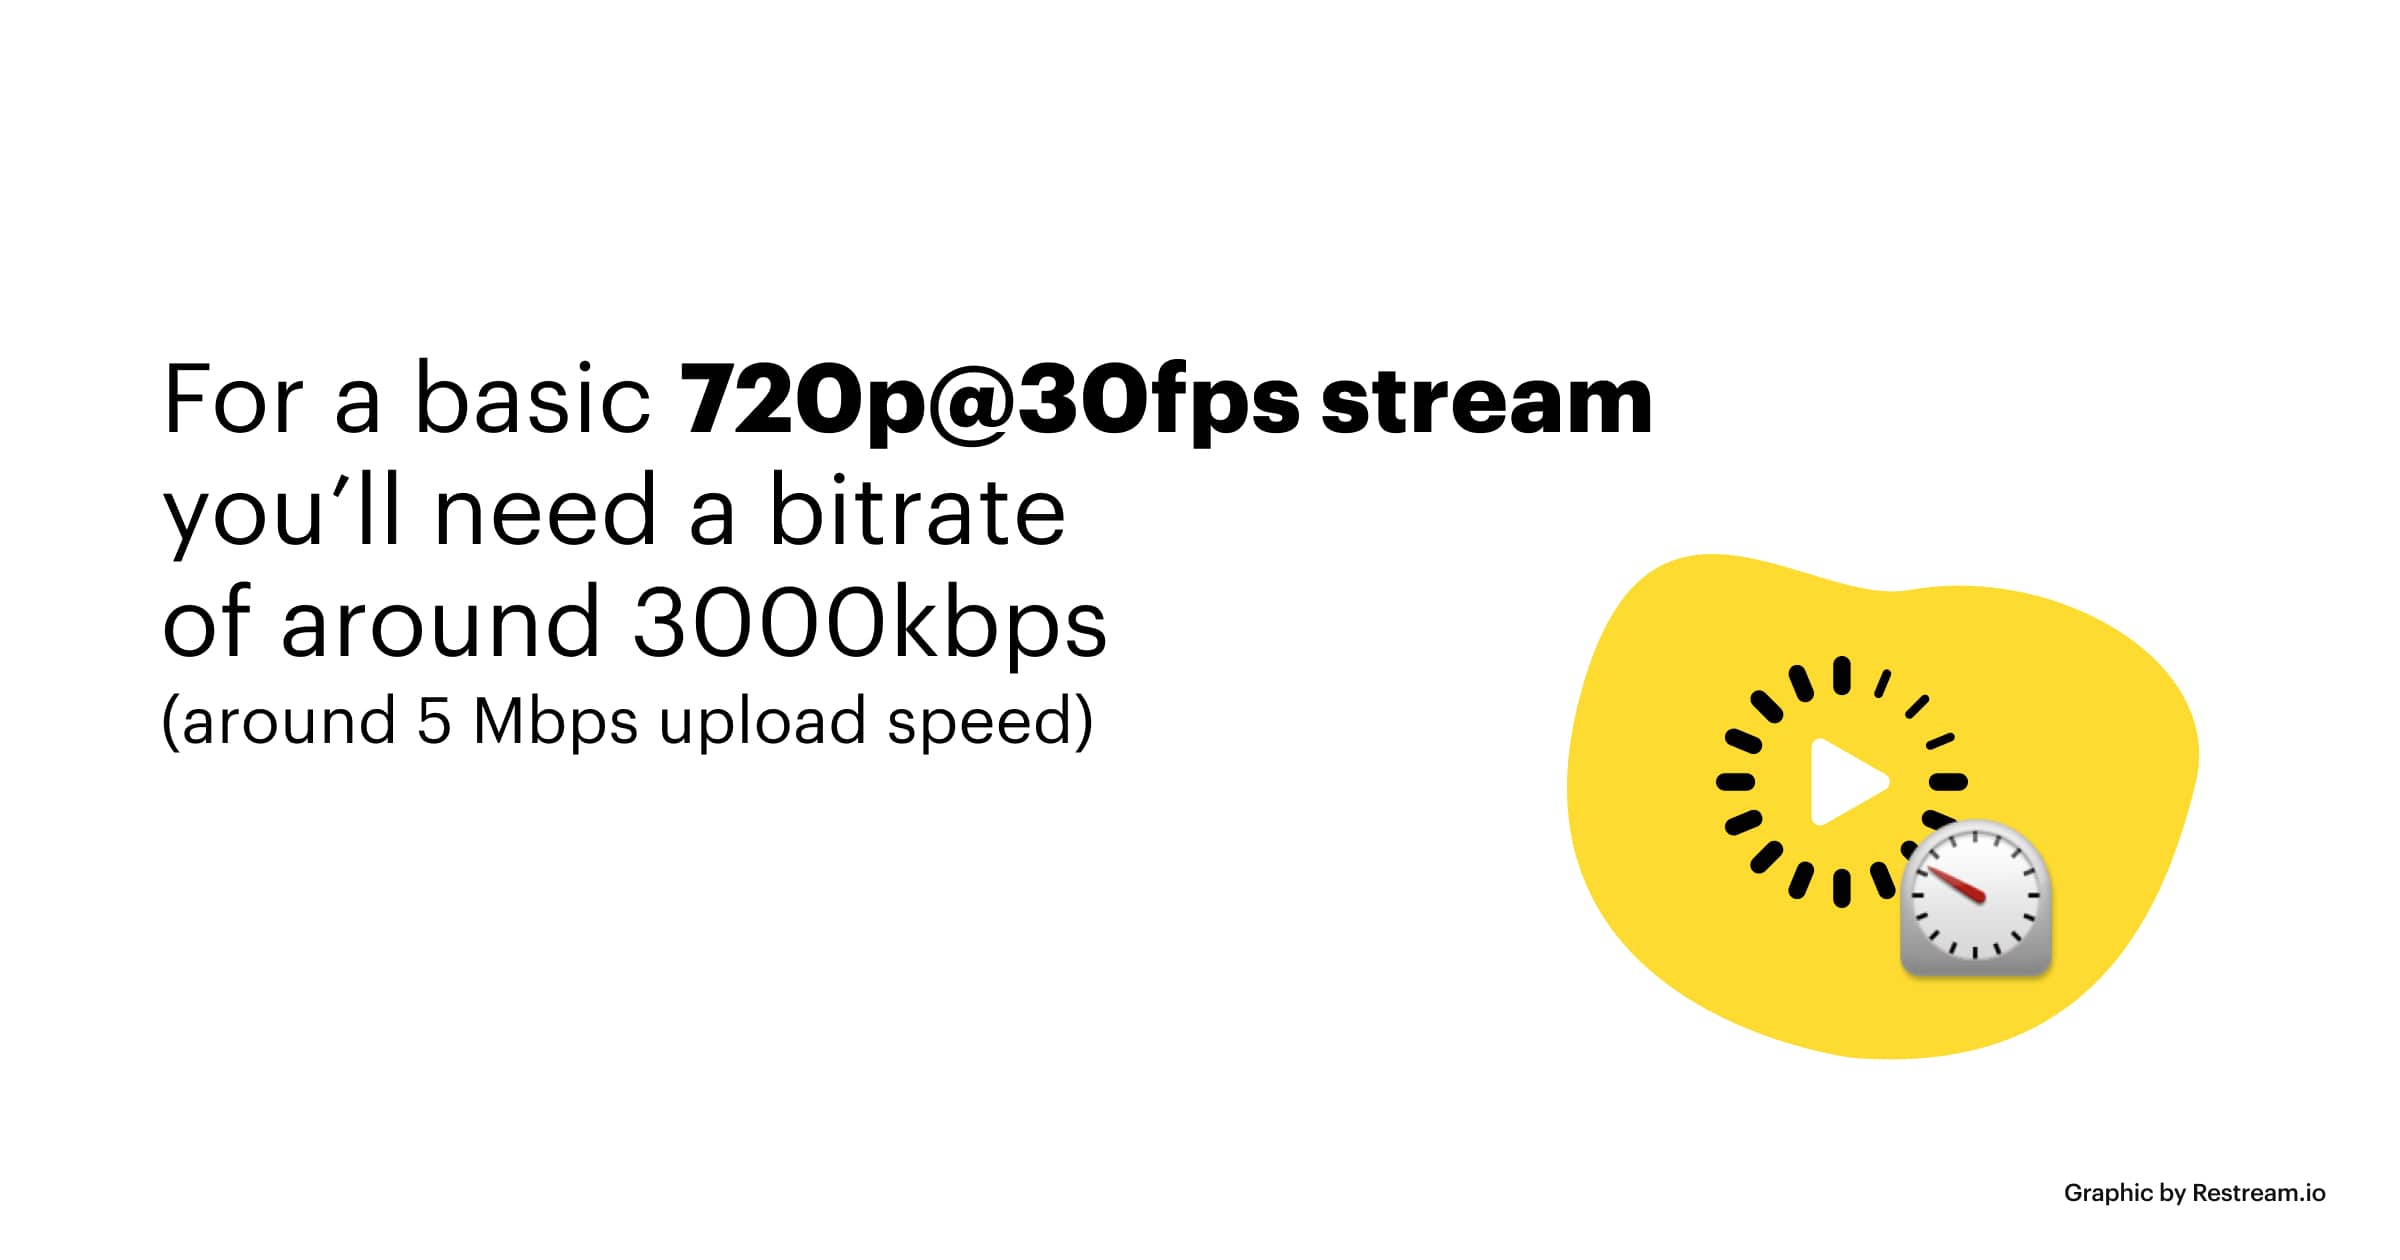 For a basic 720p@30fps stream you’ll need a bitrate of around 3000kbps (around 5 Mbps upload speed)